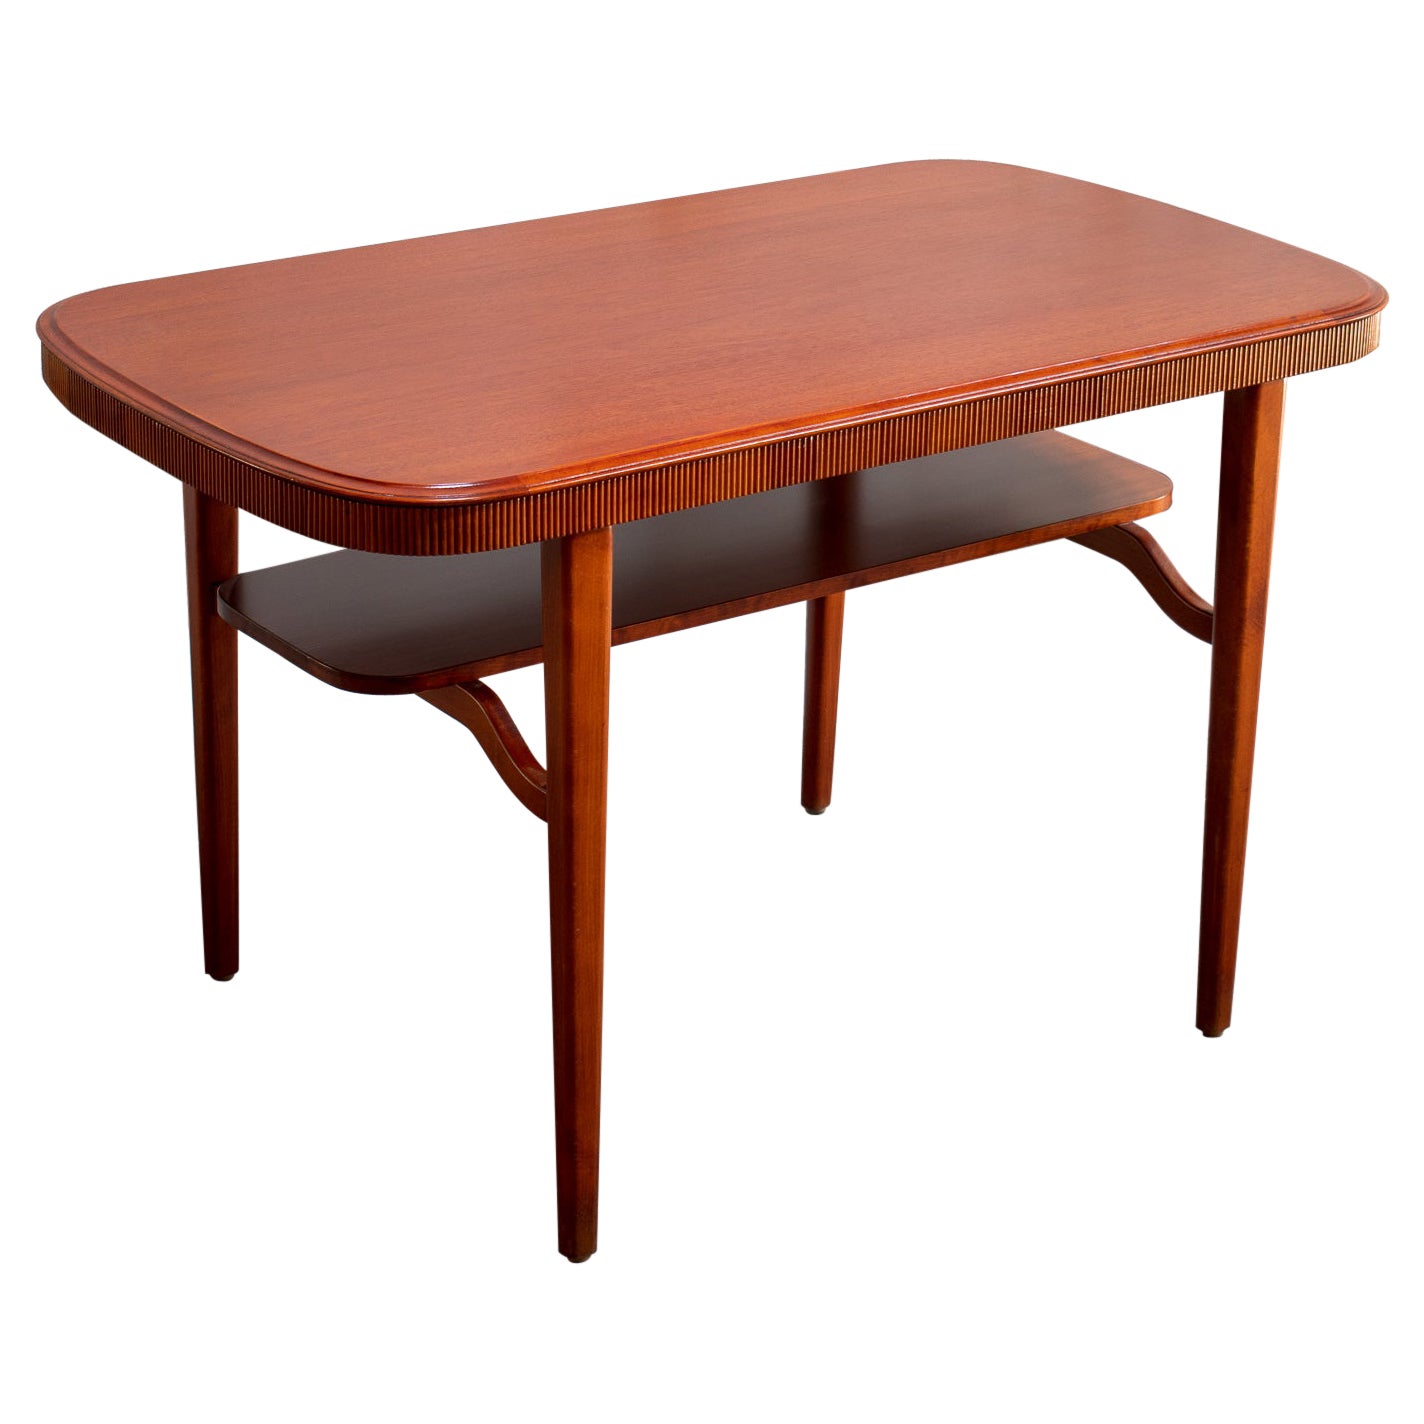 Mid-Century Modern Mahogany End or Coffee Table with Shelf, Sweden, c. 1950 For Sale